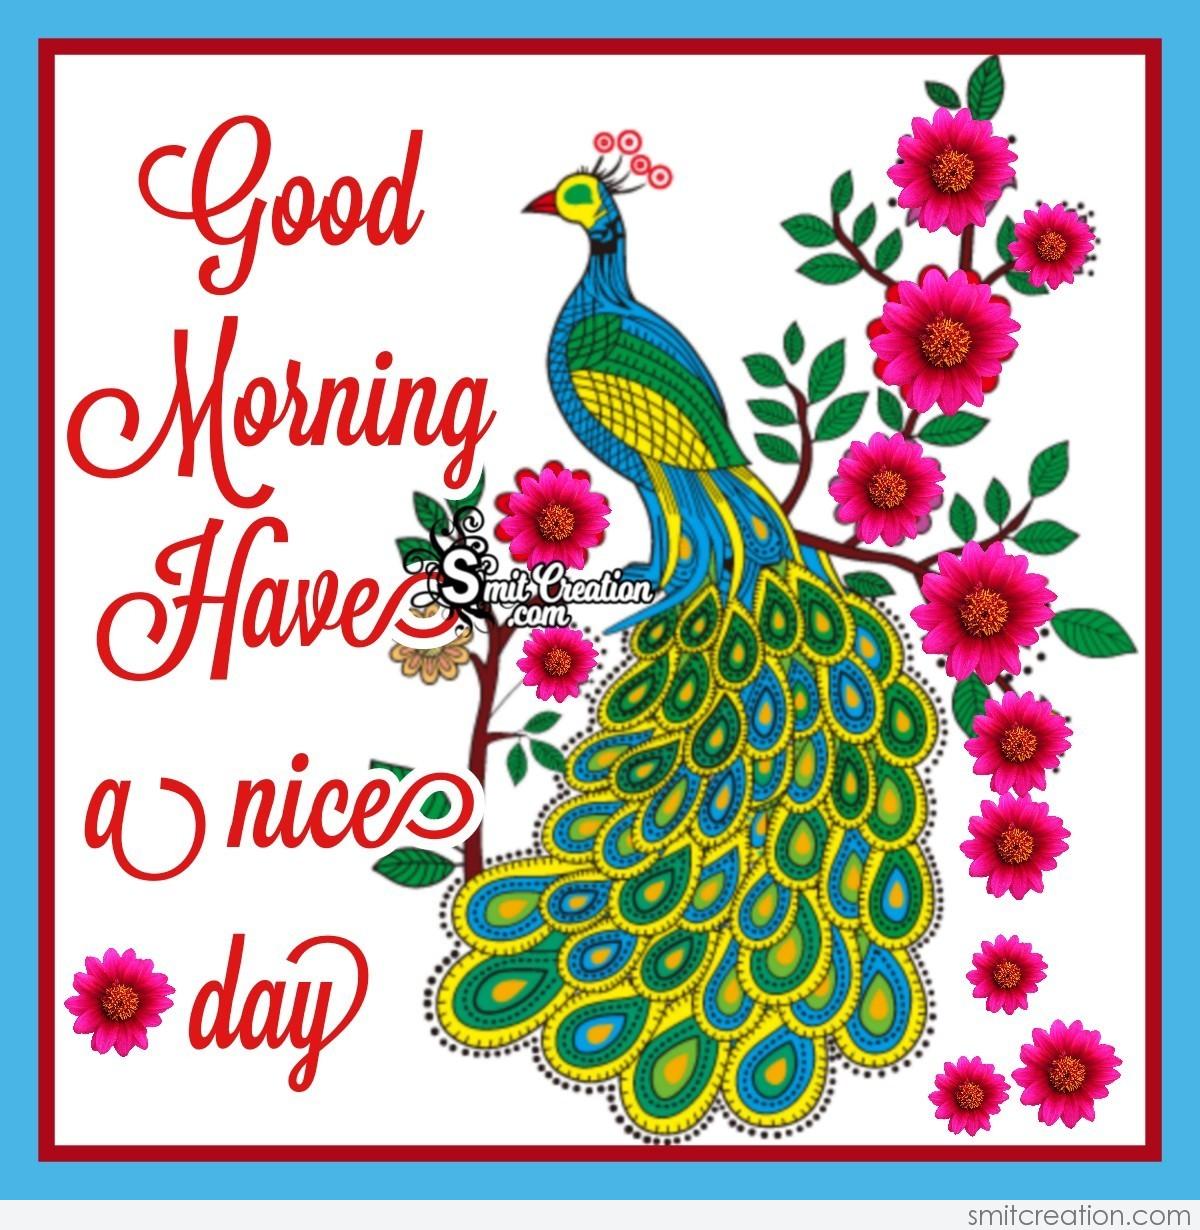 Good Morning Colourful Birds Pictures - SmitCreation.com